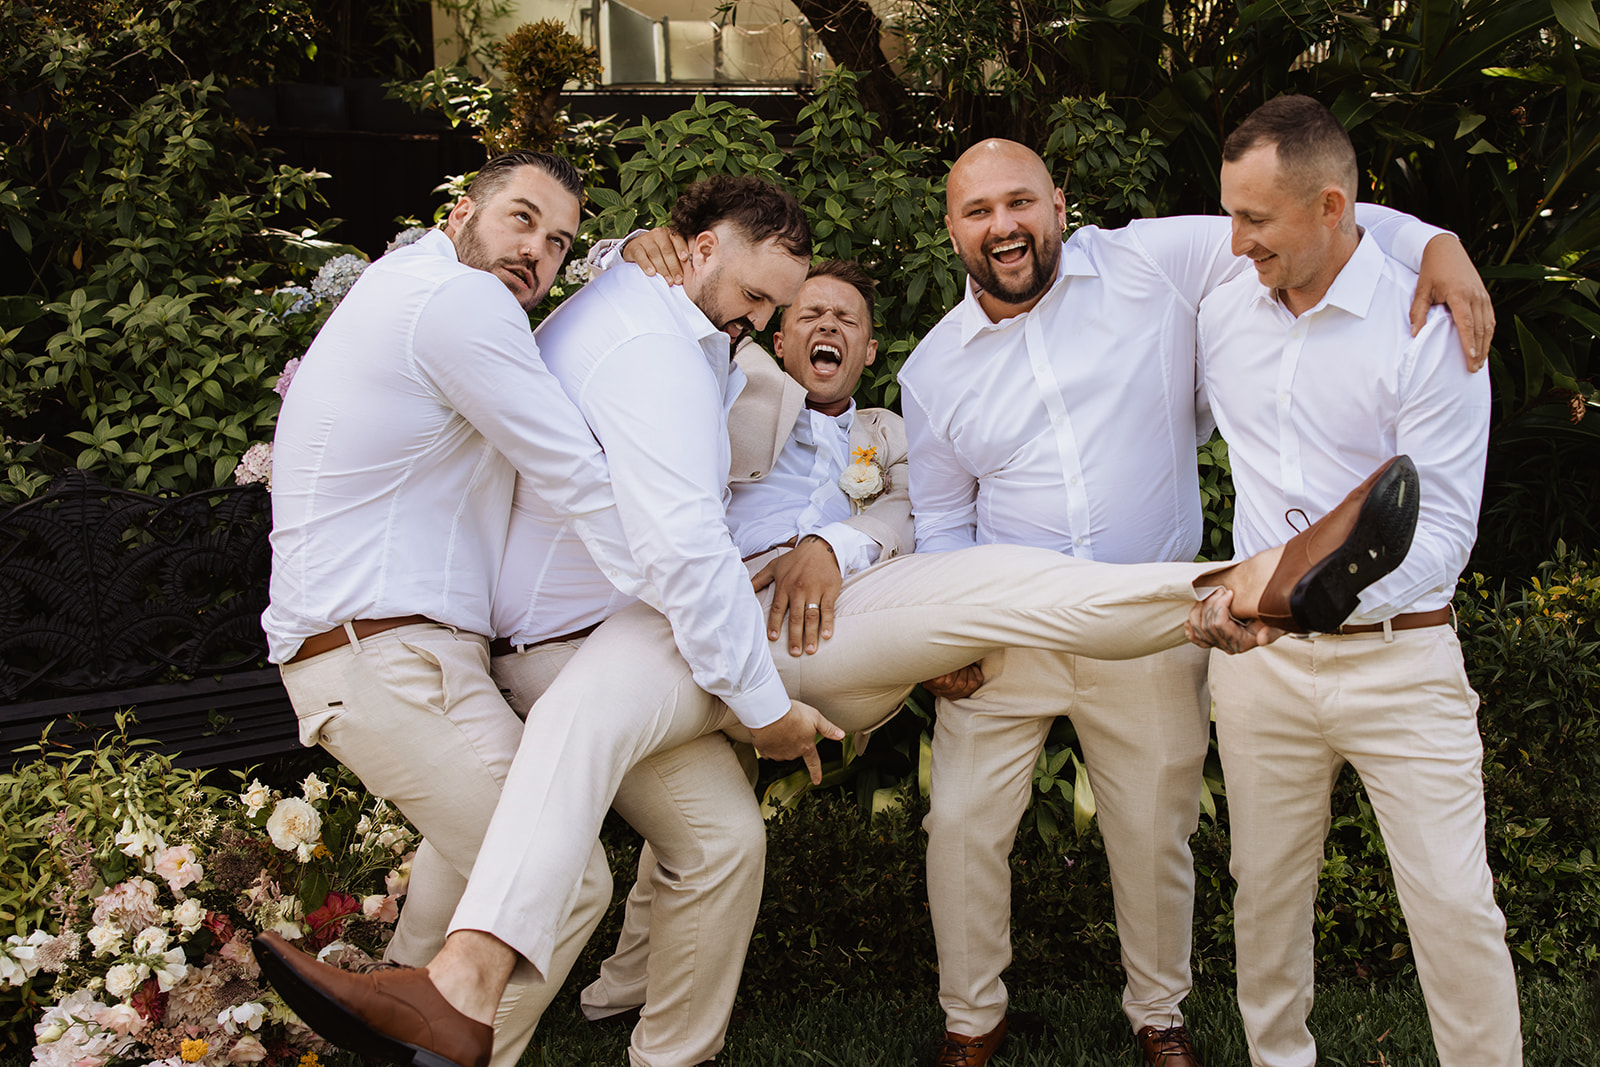 Groom and Groomsmen at the Wedding in Lindesay House, Darling Point New South Wales